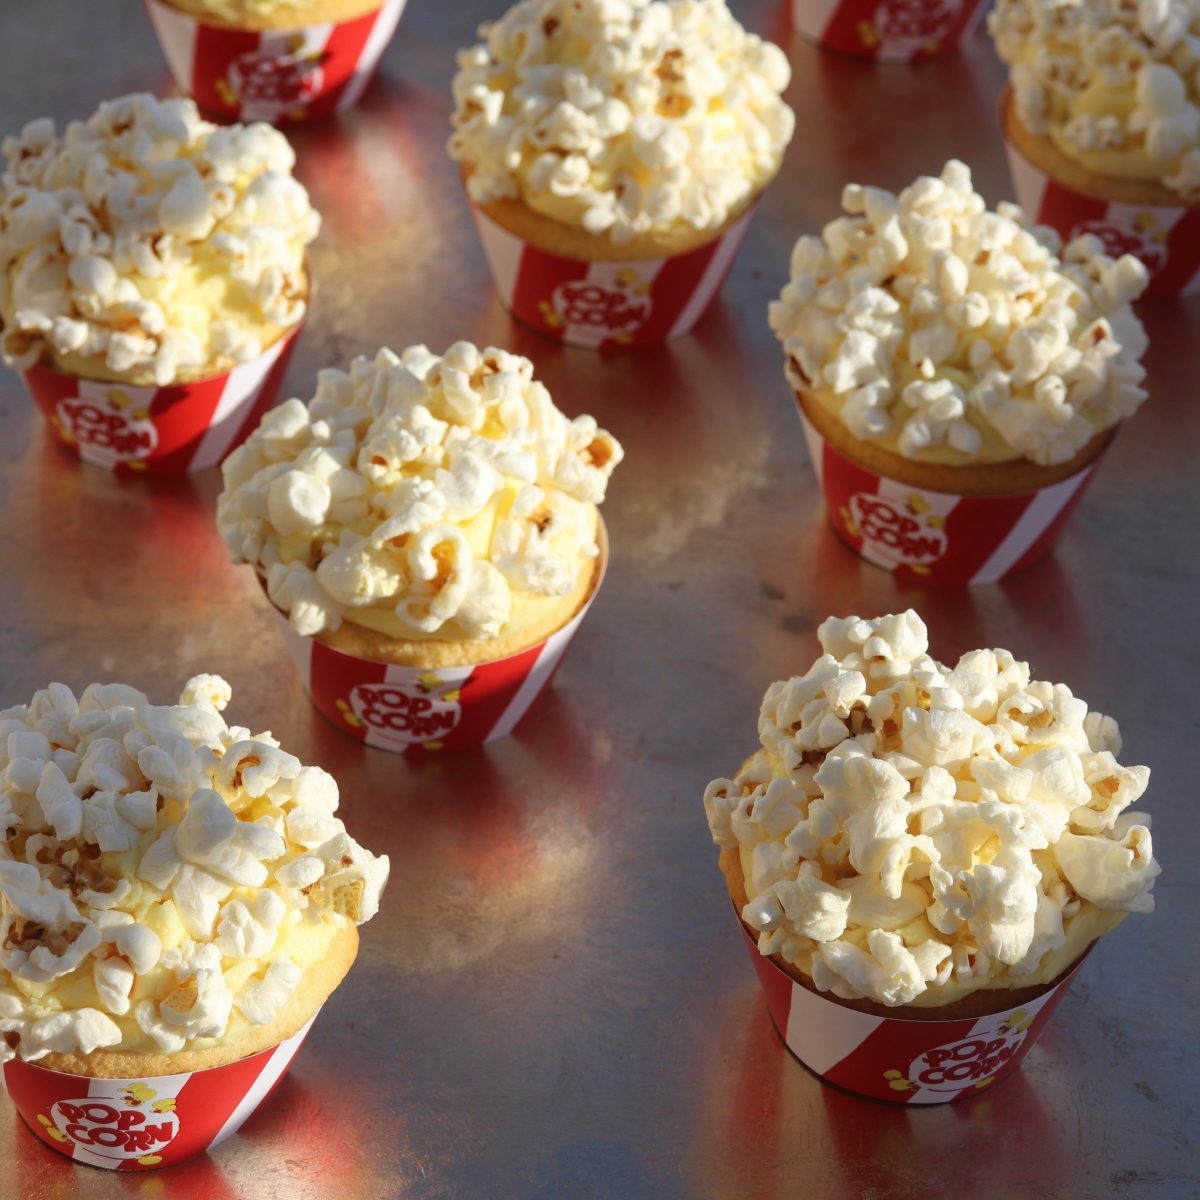 Oscars, Academy Awards, Movie Star, Awards Show, Viewing, Cupcake, Popcorn, Downloadable Template, Party Snack